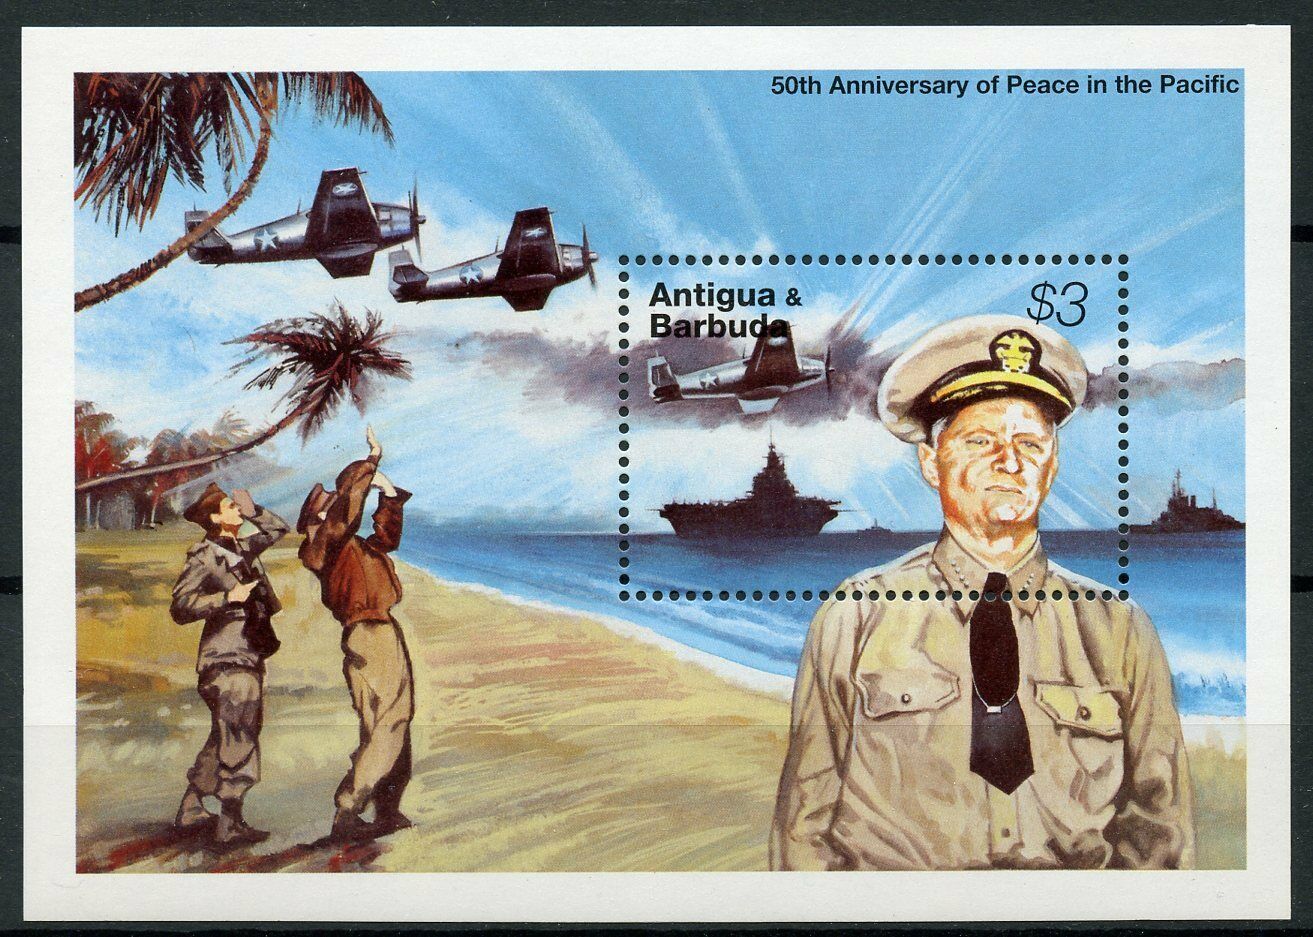 Antigua & Barbuda Aviation Stamps 1995 MNH WW2 WWII VJ Day Peace Pacific 1v S/S